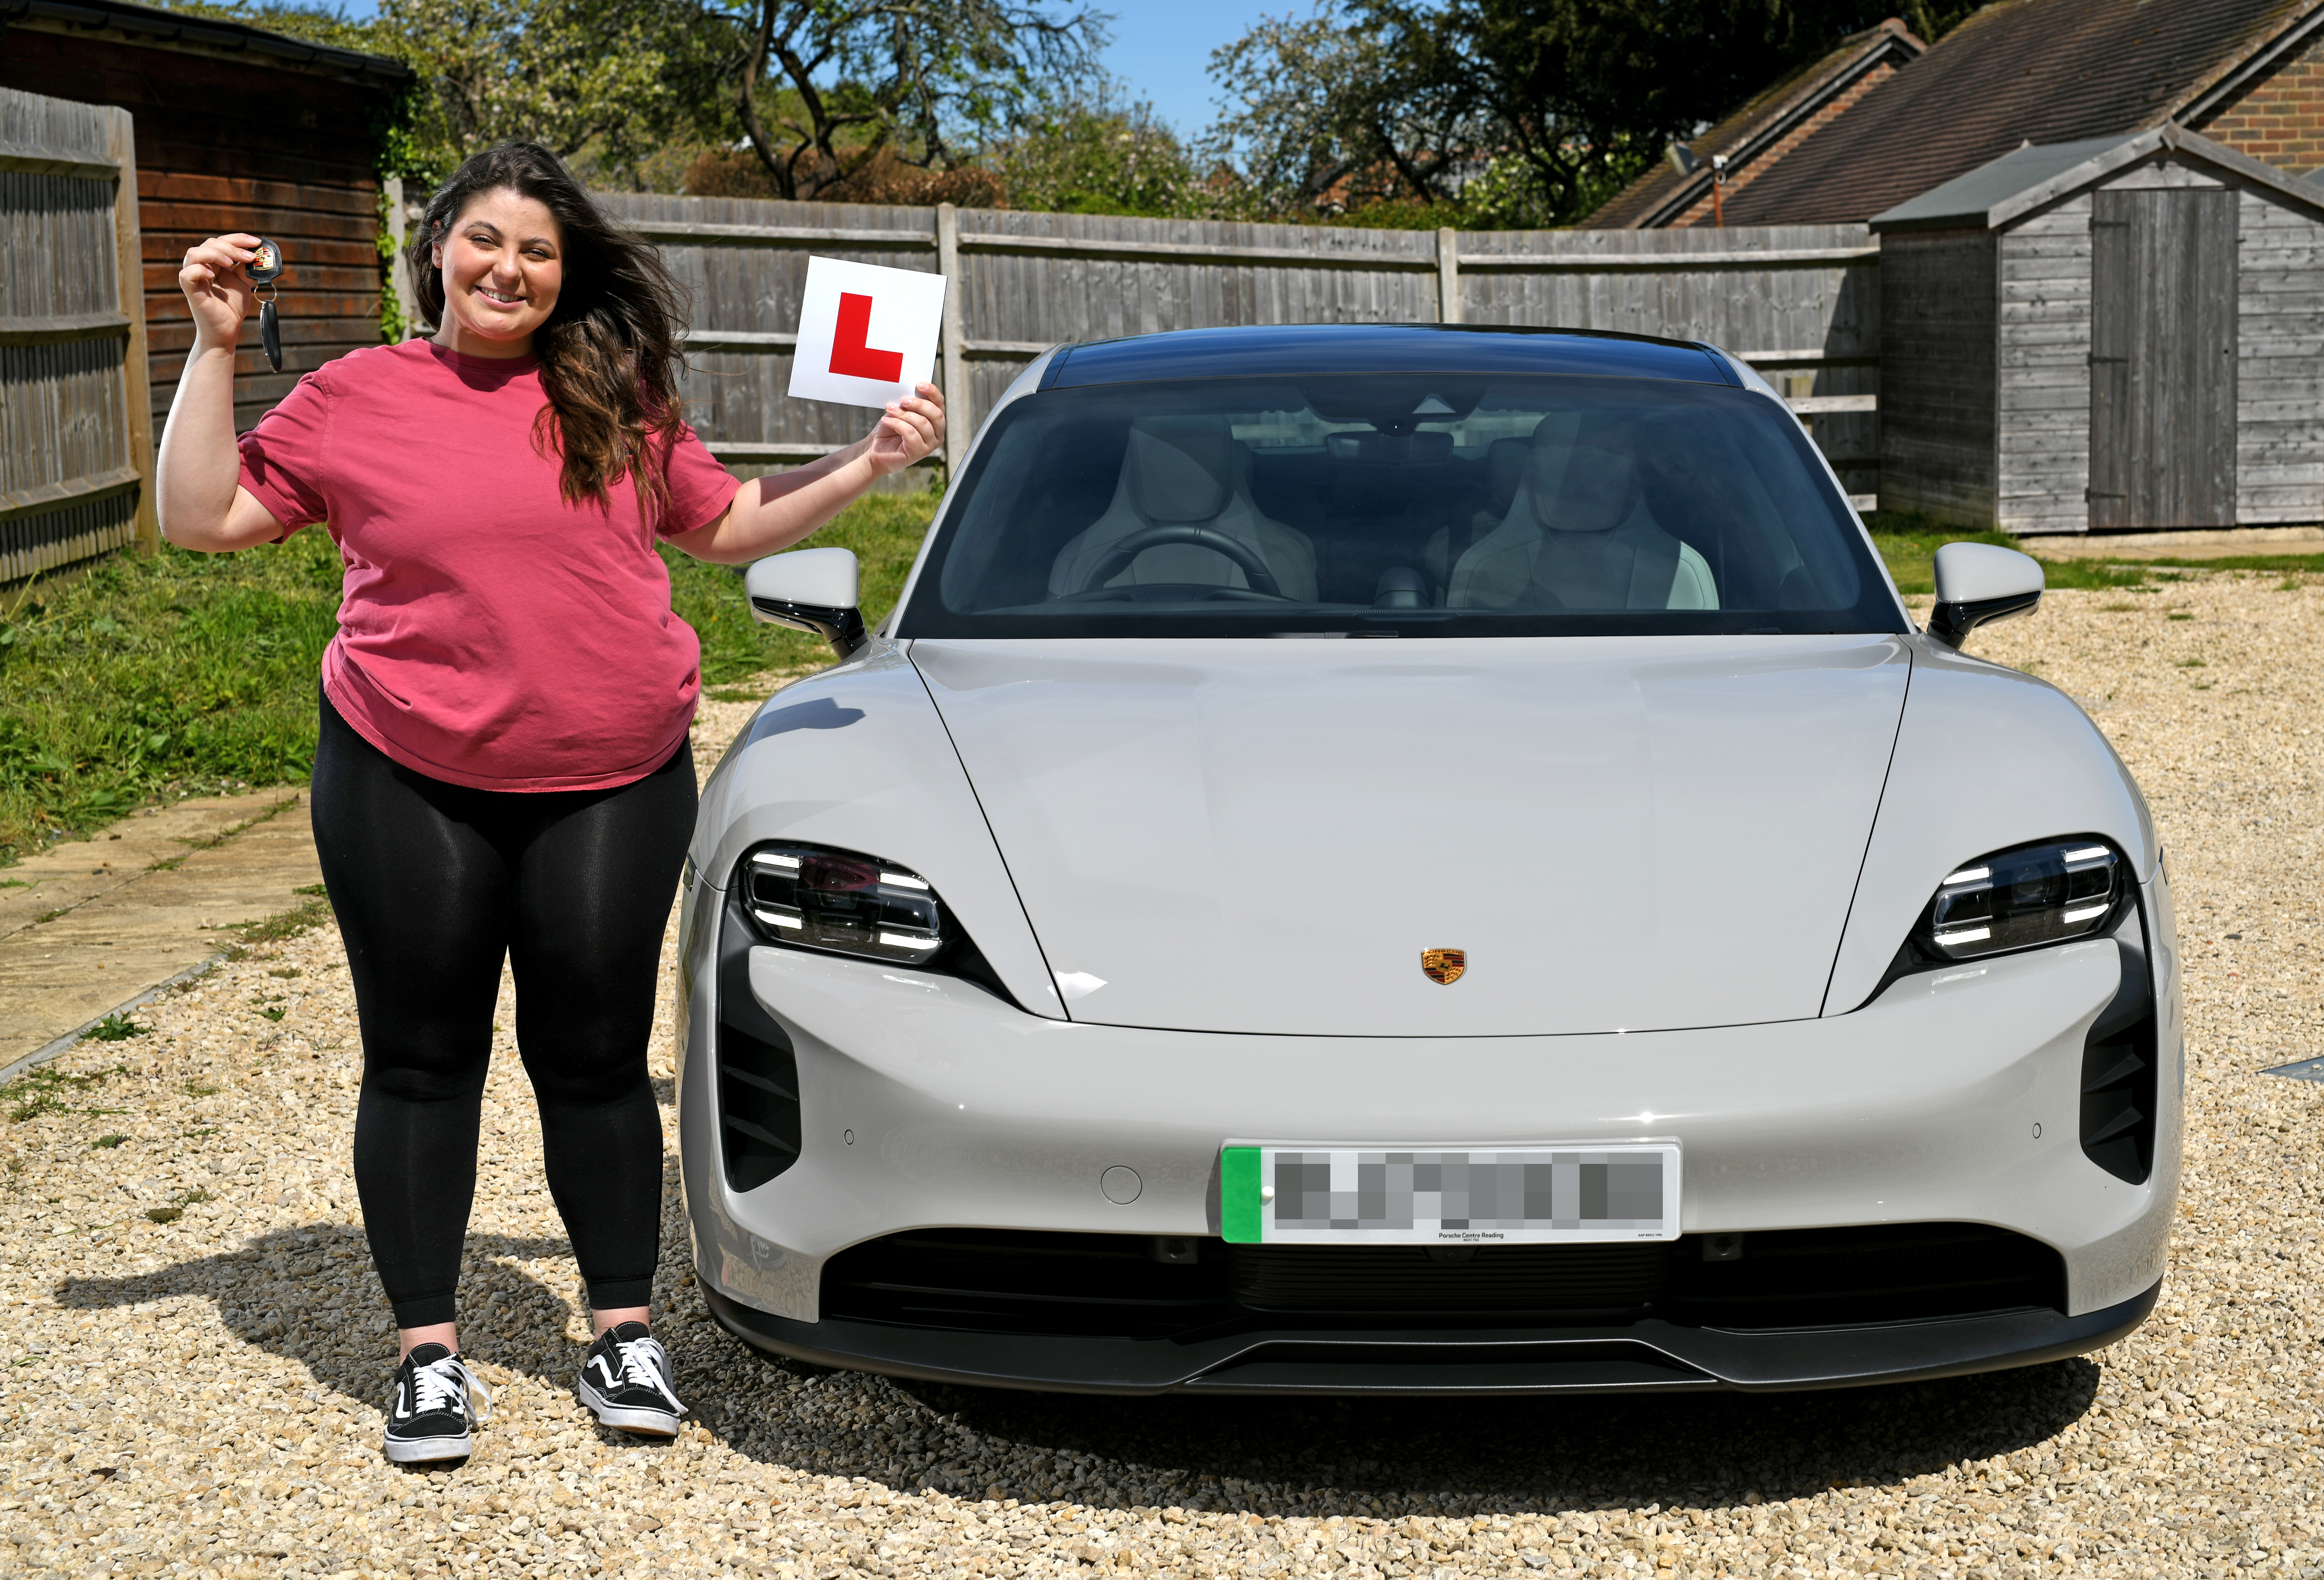 Phoebe Kneller is set to take her driving test later this month